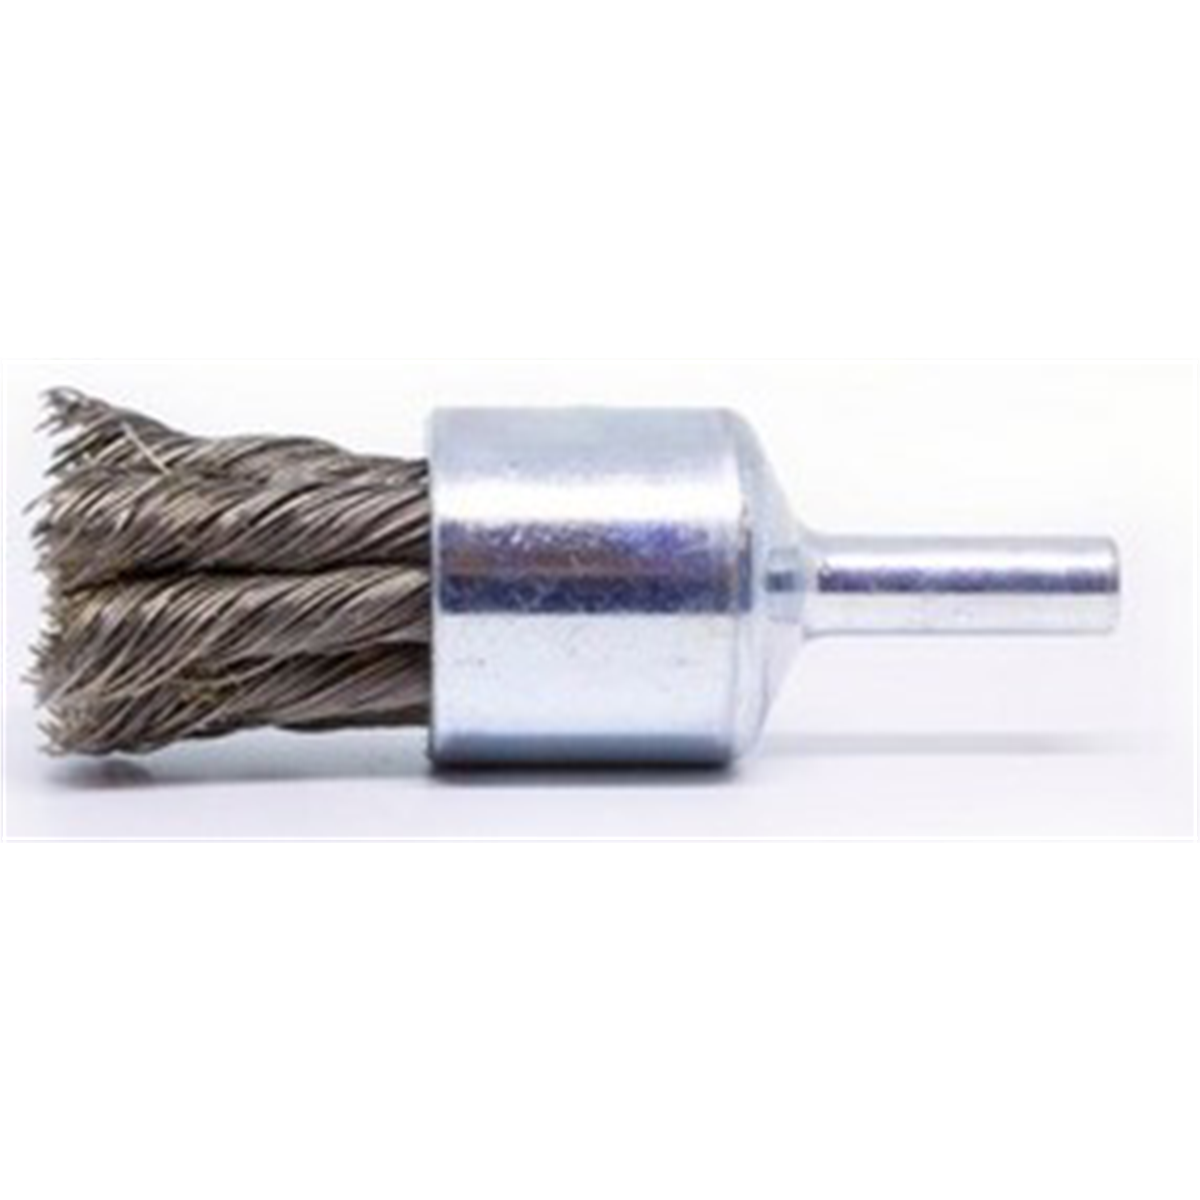 BNH-6 .014 Standard Knotted End Brush